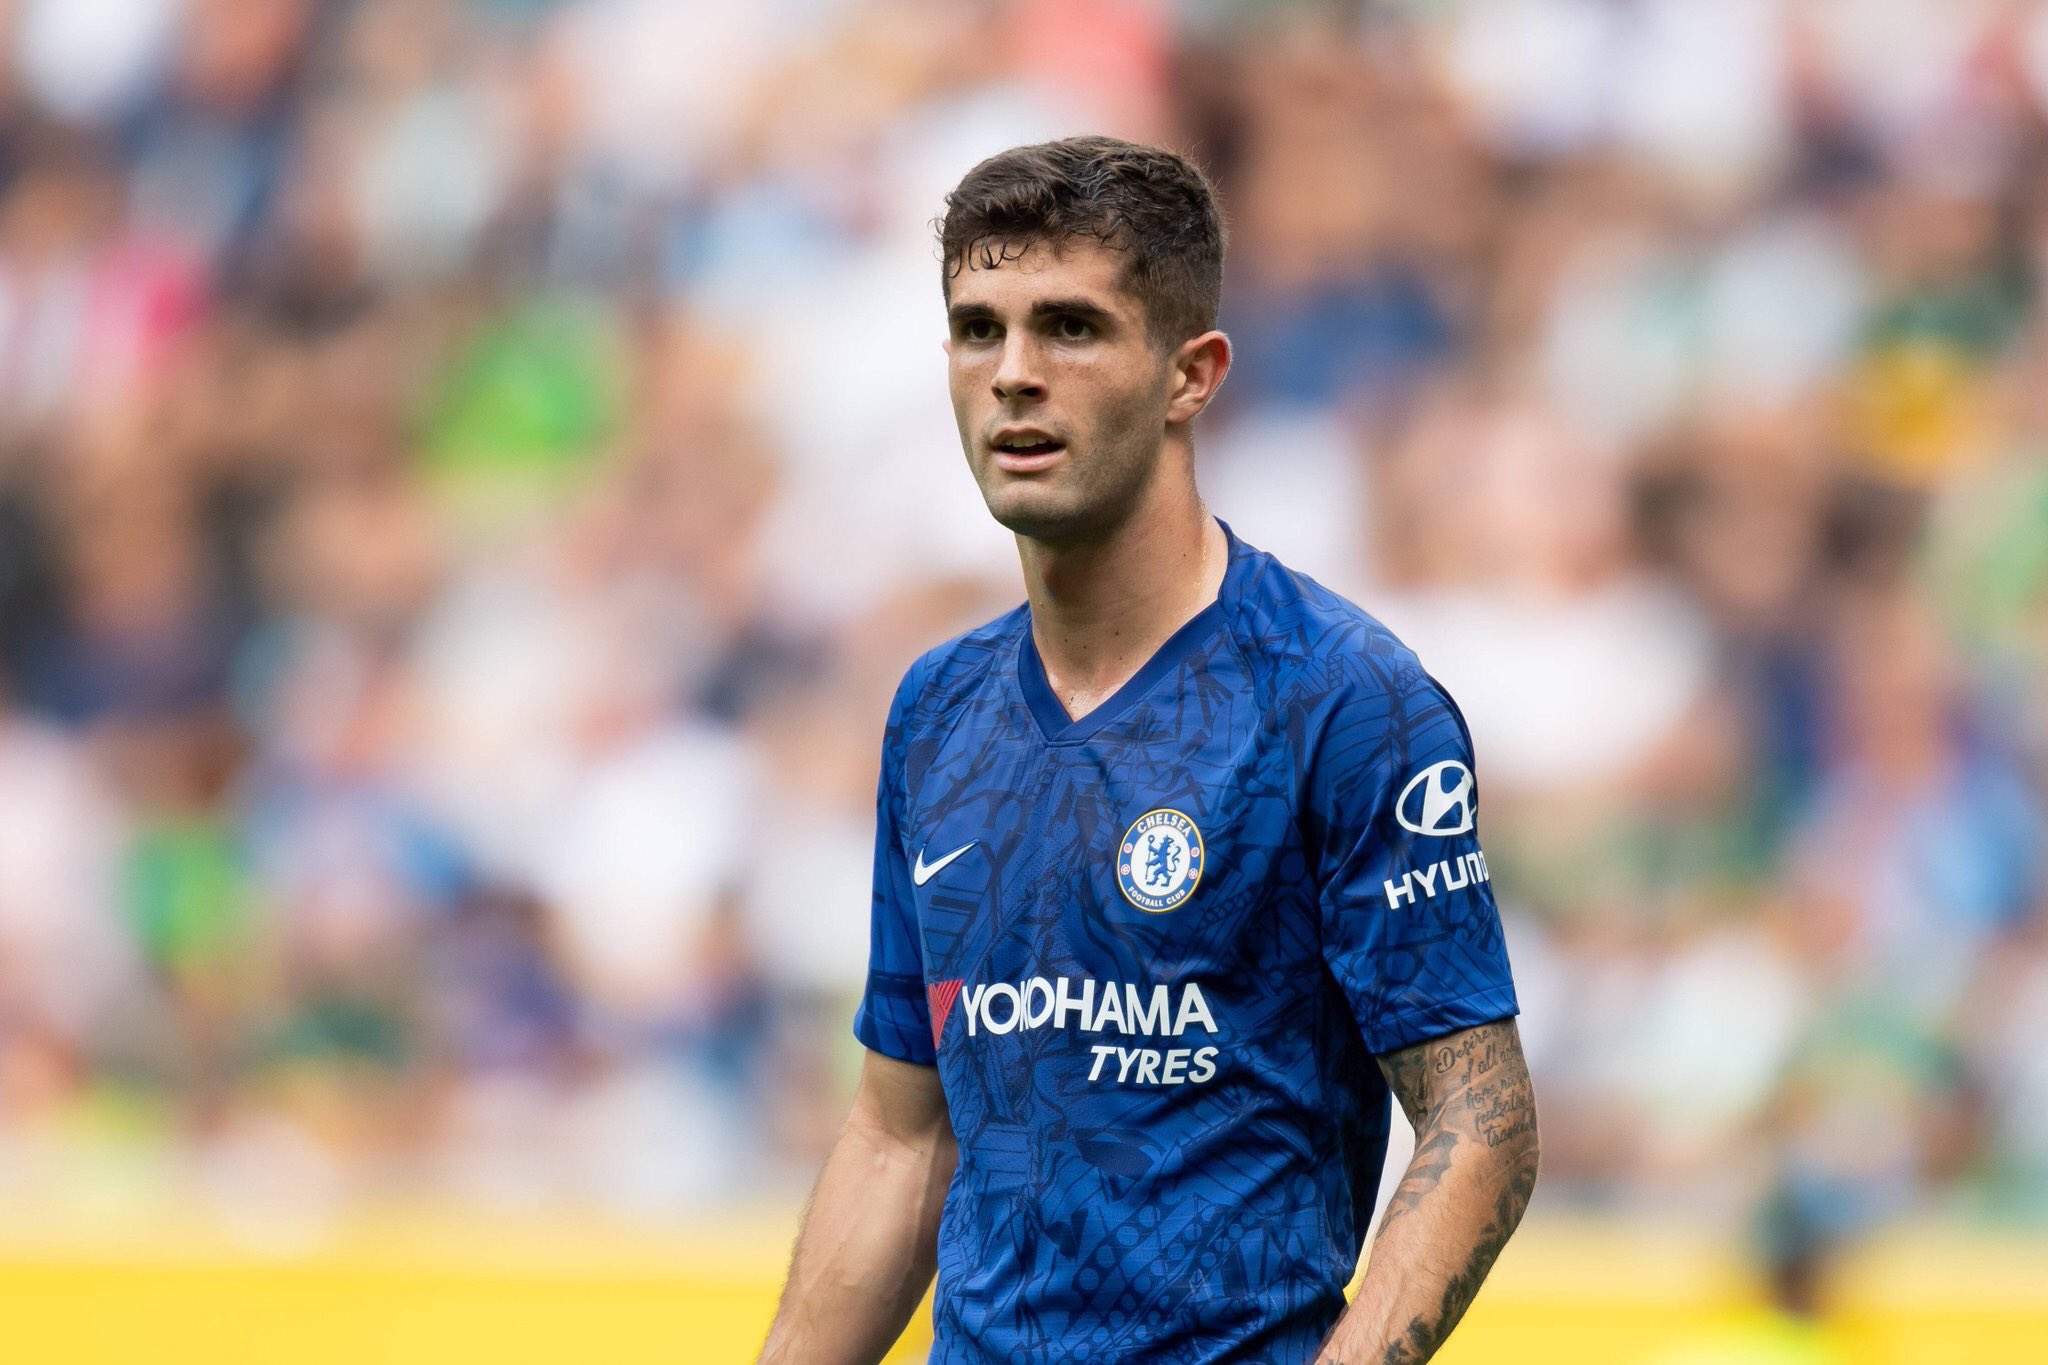 REVEALED: Chelsea star Pulisic rejected United transfer ‘because his dad hated Jose Mourinho